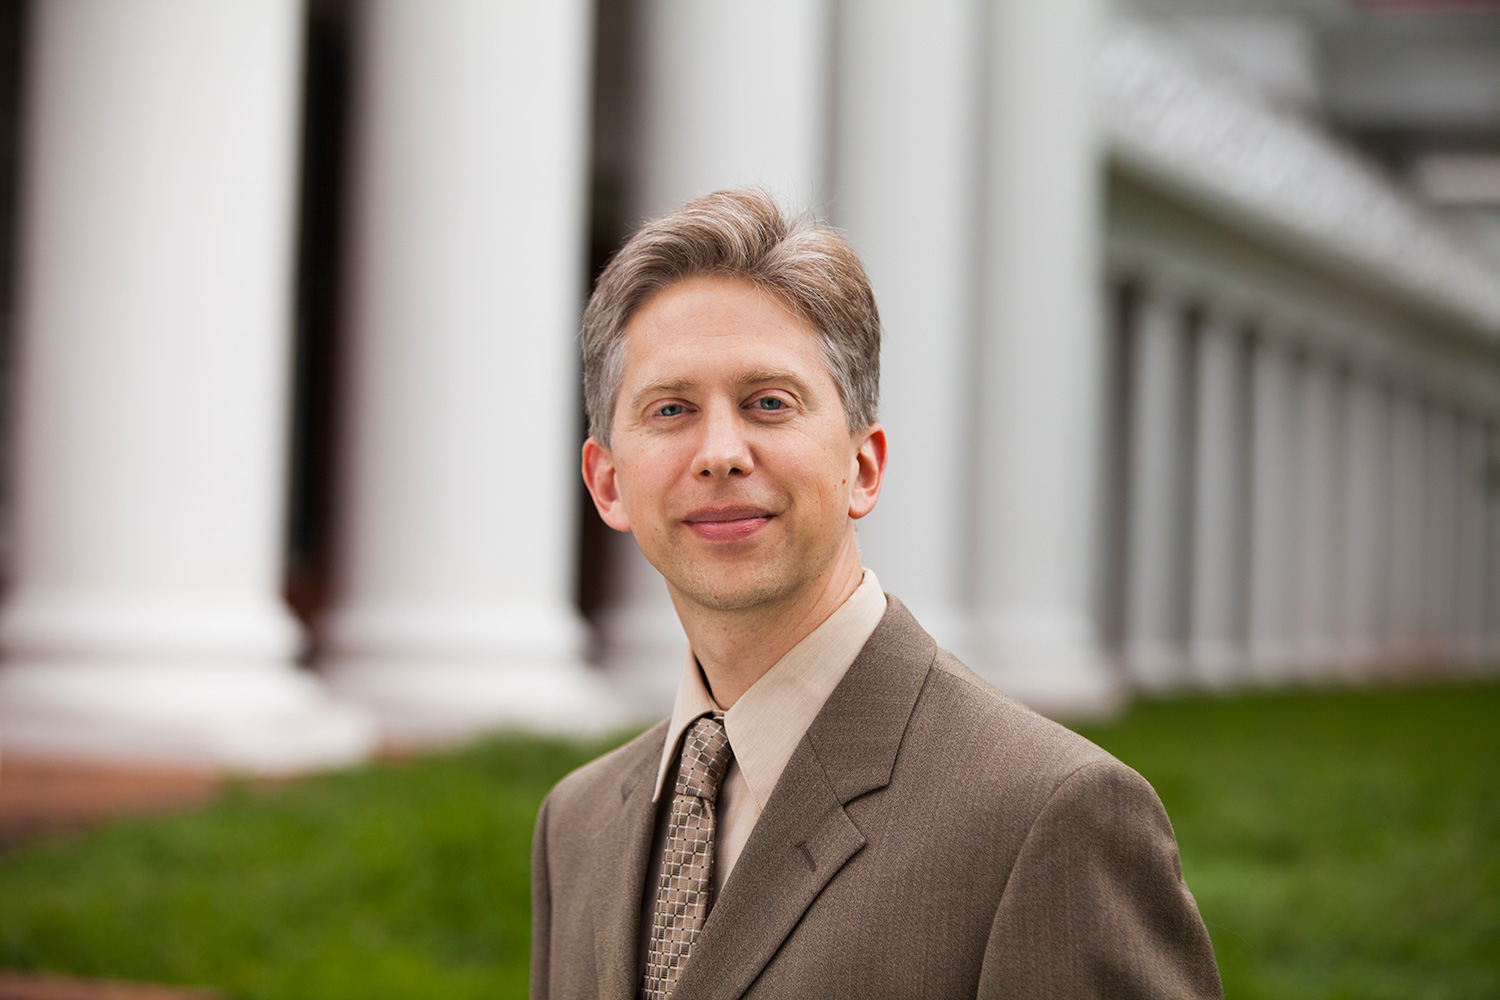 Craig Volden is co-creator of the Legislative Effectiveness Project and serves as a professor of public policy and politics and associate dean for academic affairs at the Frank Batten School. (Photo by Don Hamerman)